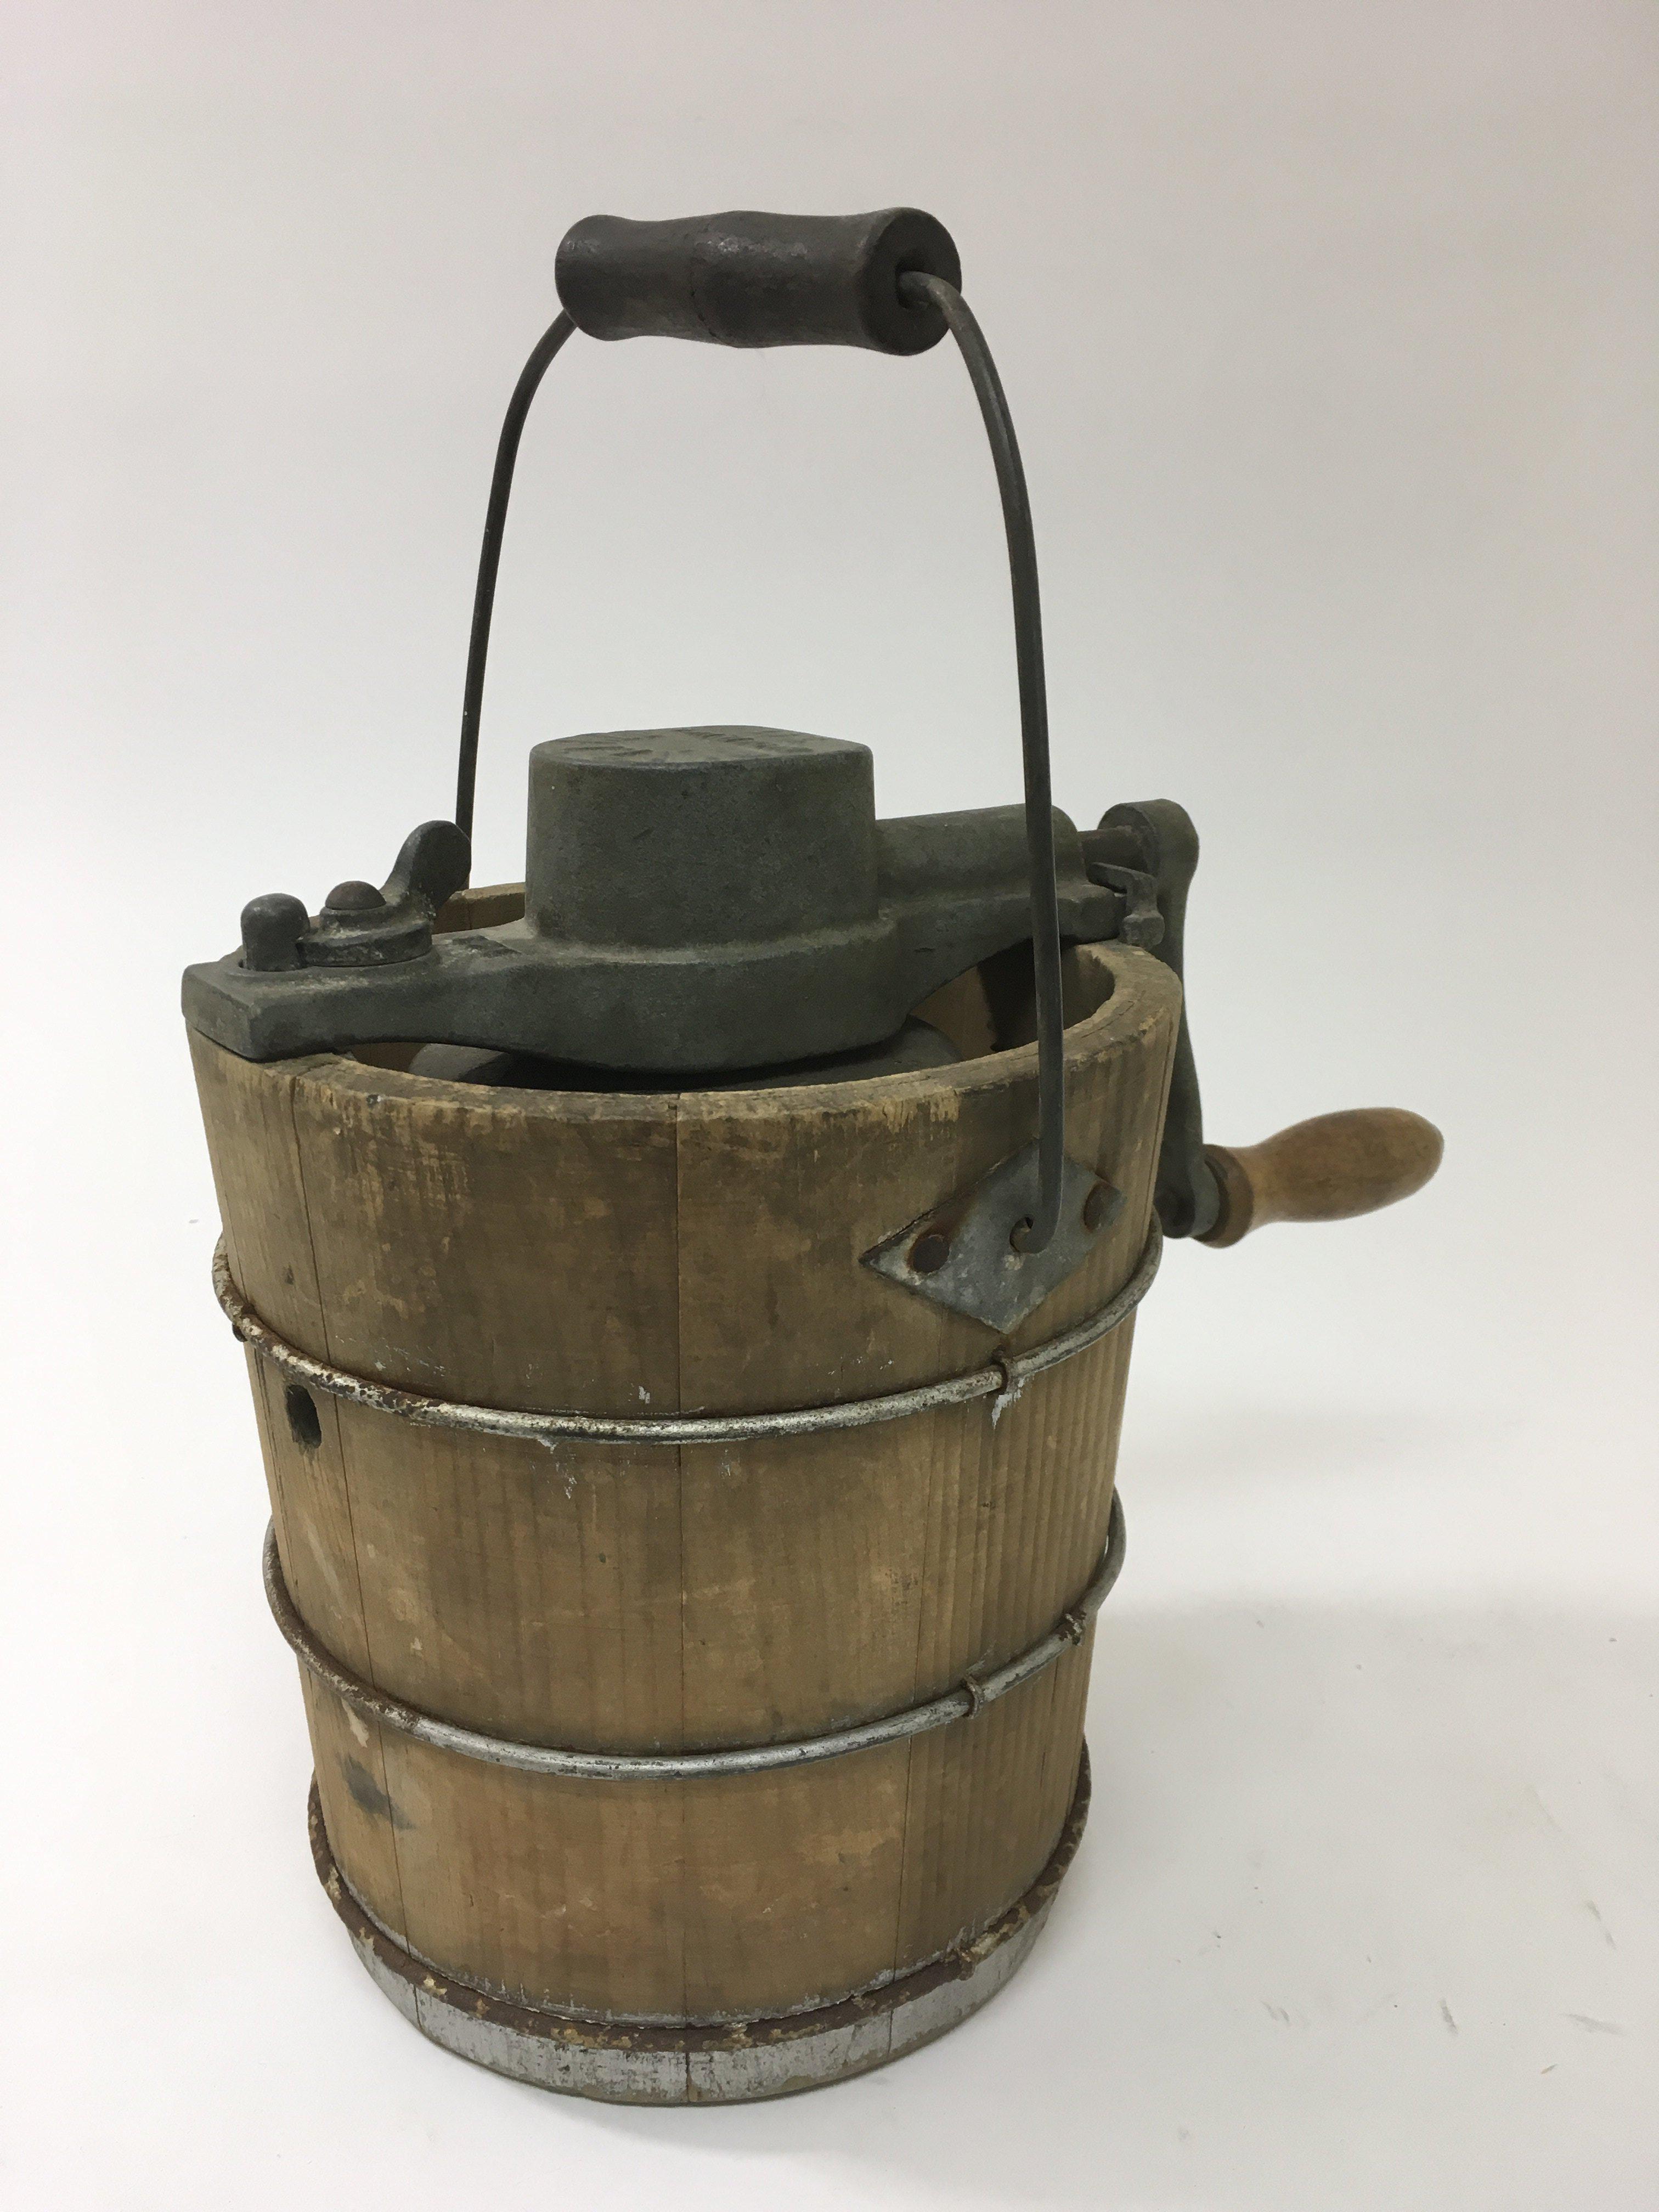 An antique Blizzard ice cream maker, made in the USA.